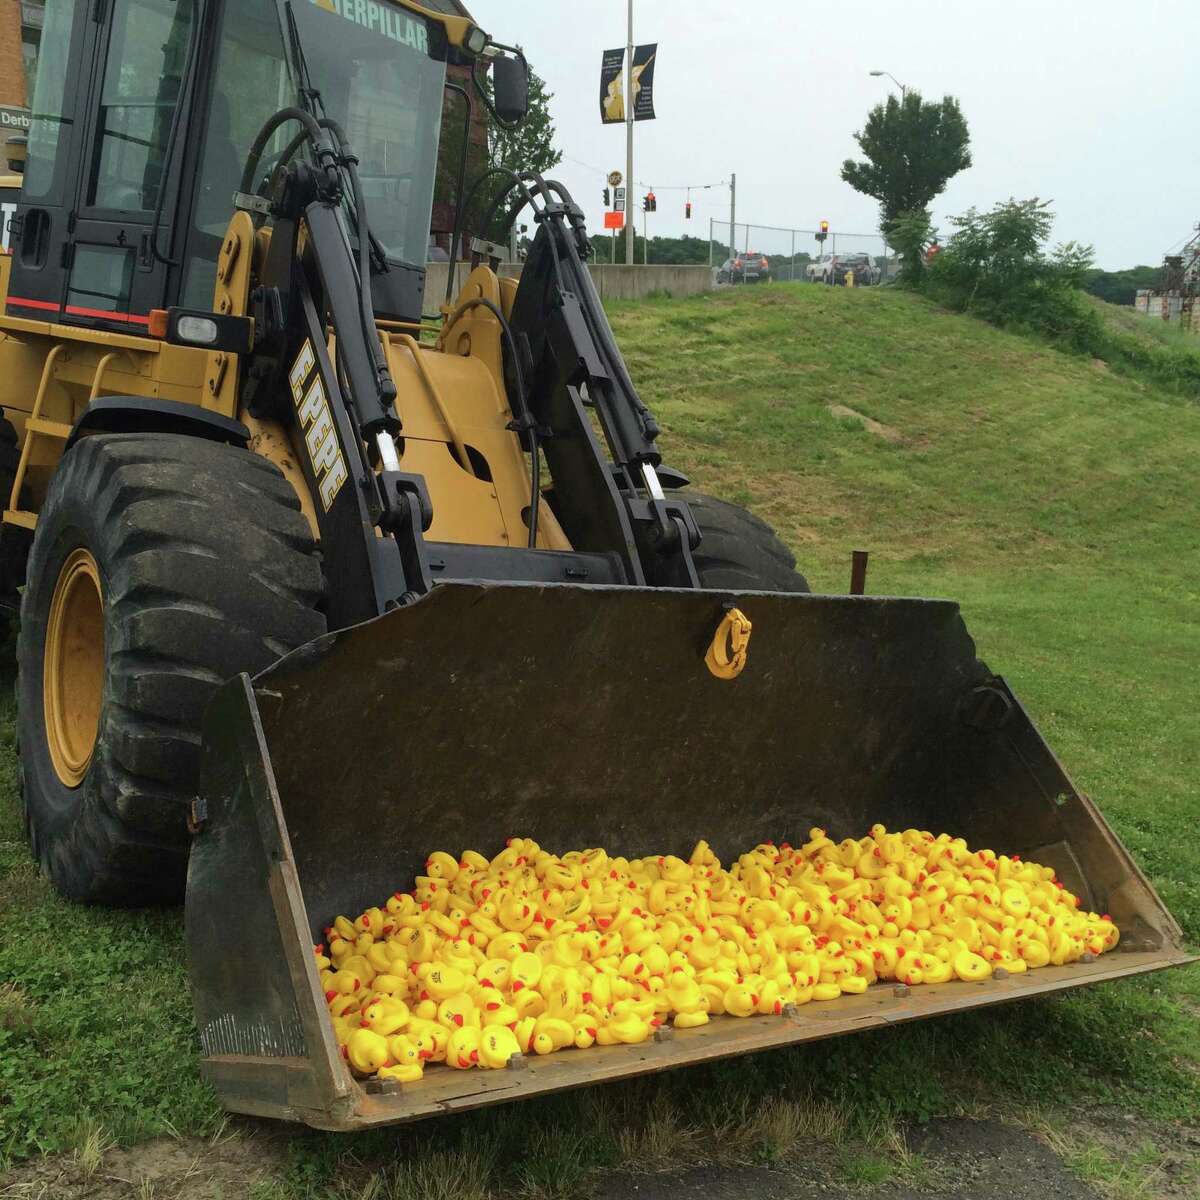 The Housy River Duck Race takes place on Saturday, June 24 at 2 p.m. starting at the Derby/Shelton Bridge on the Housatonic River. Photo courtesy of Area Congregations Together Spooner House.